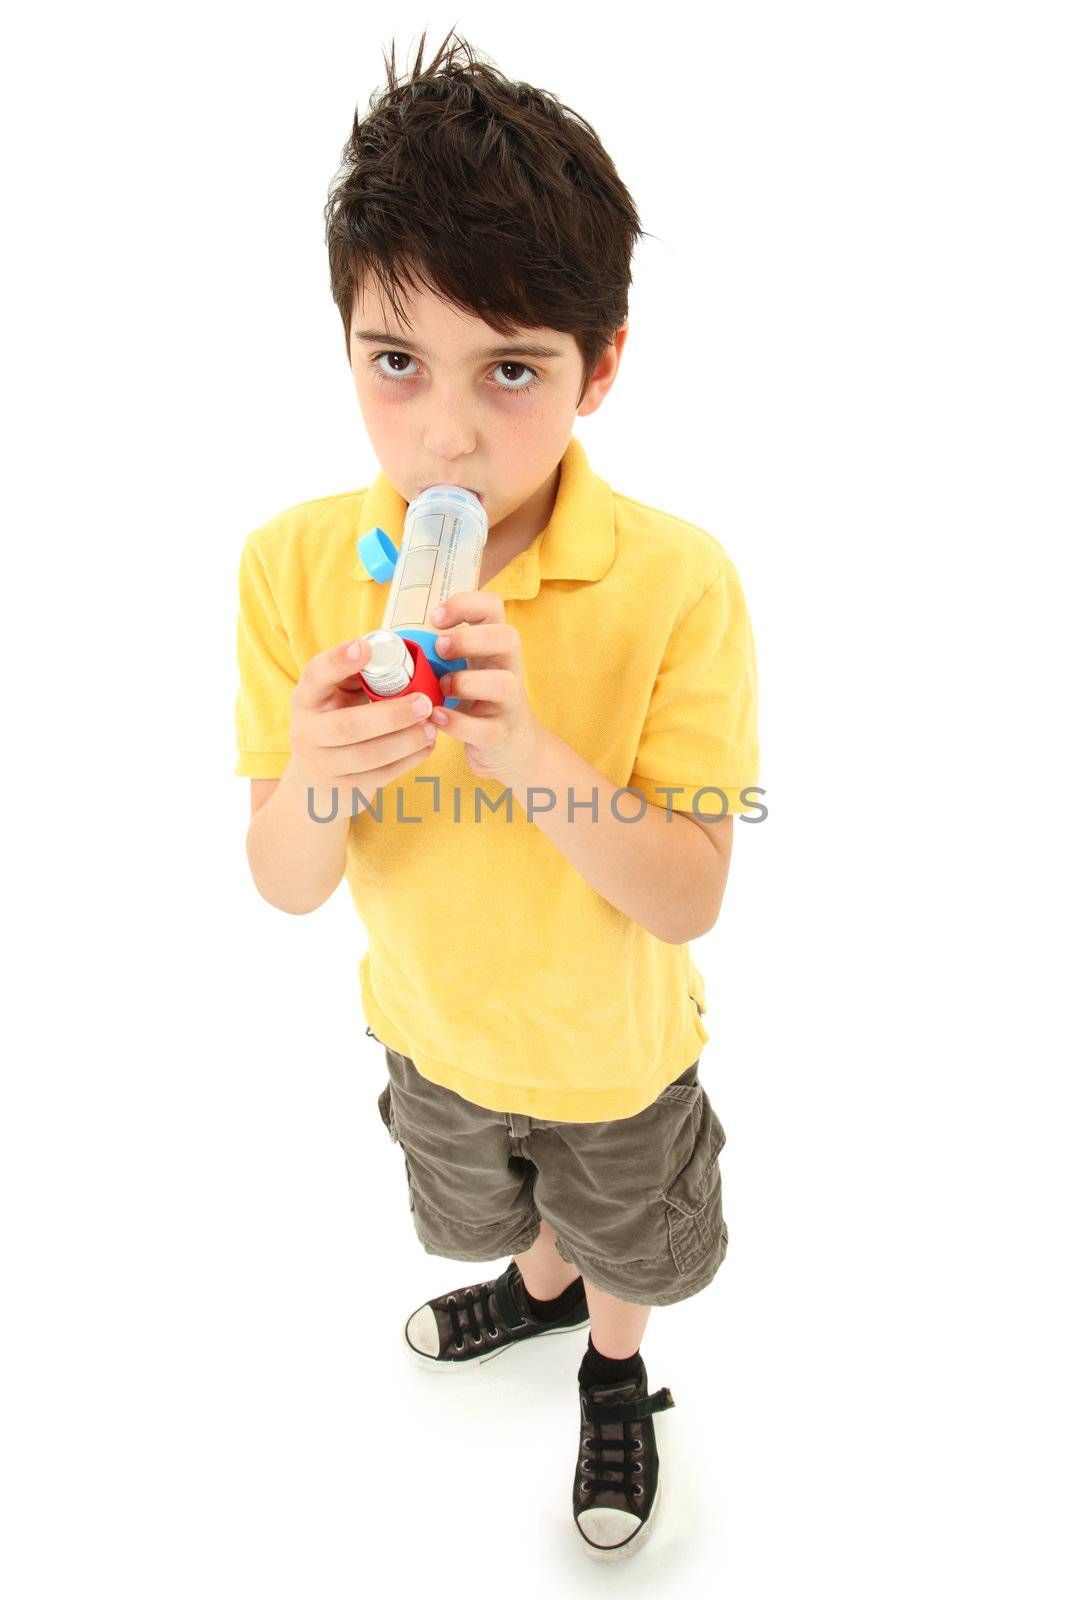 Sick young boy child using asthma inhaler with spacer chamber over white.  Has periorbital hyperpigmentation.